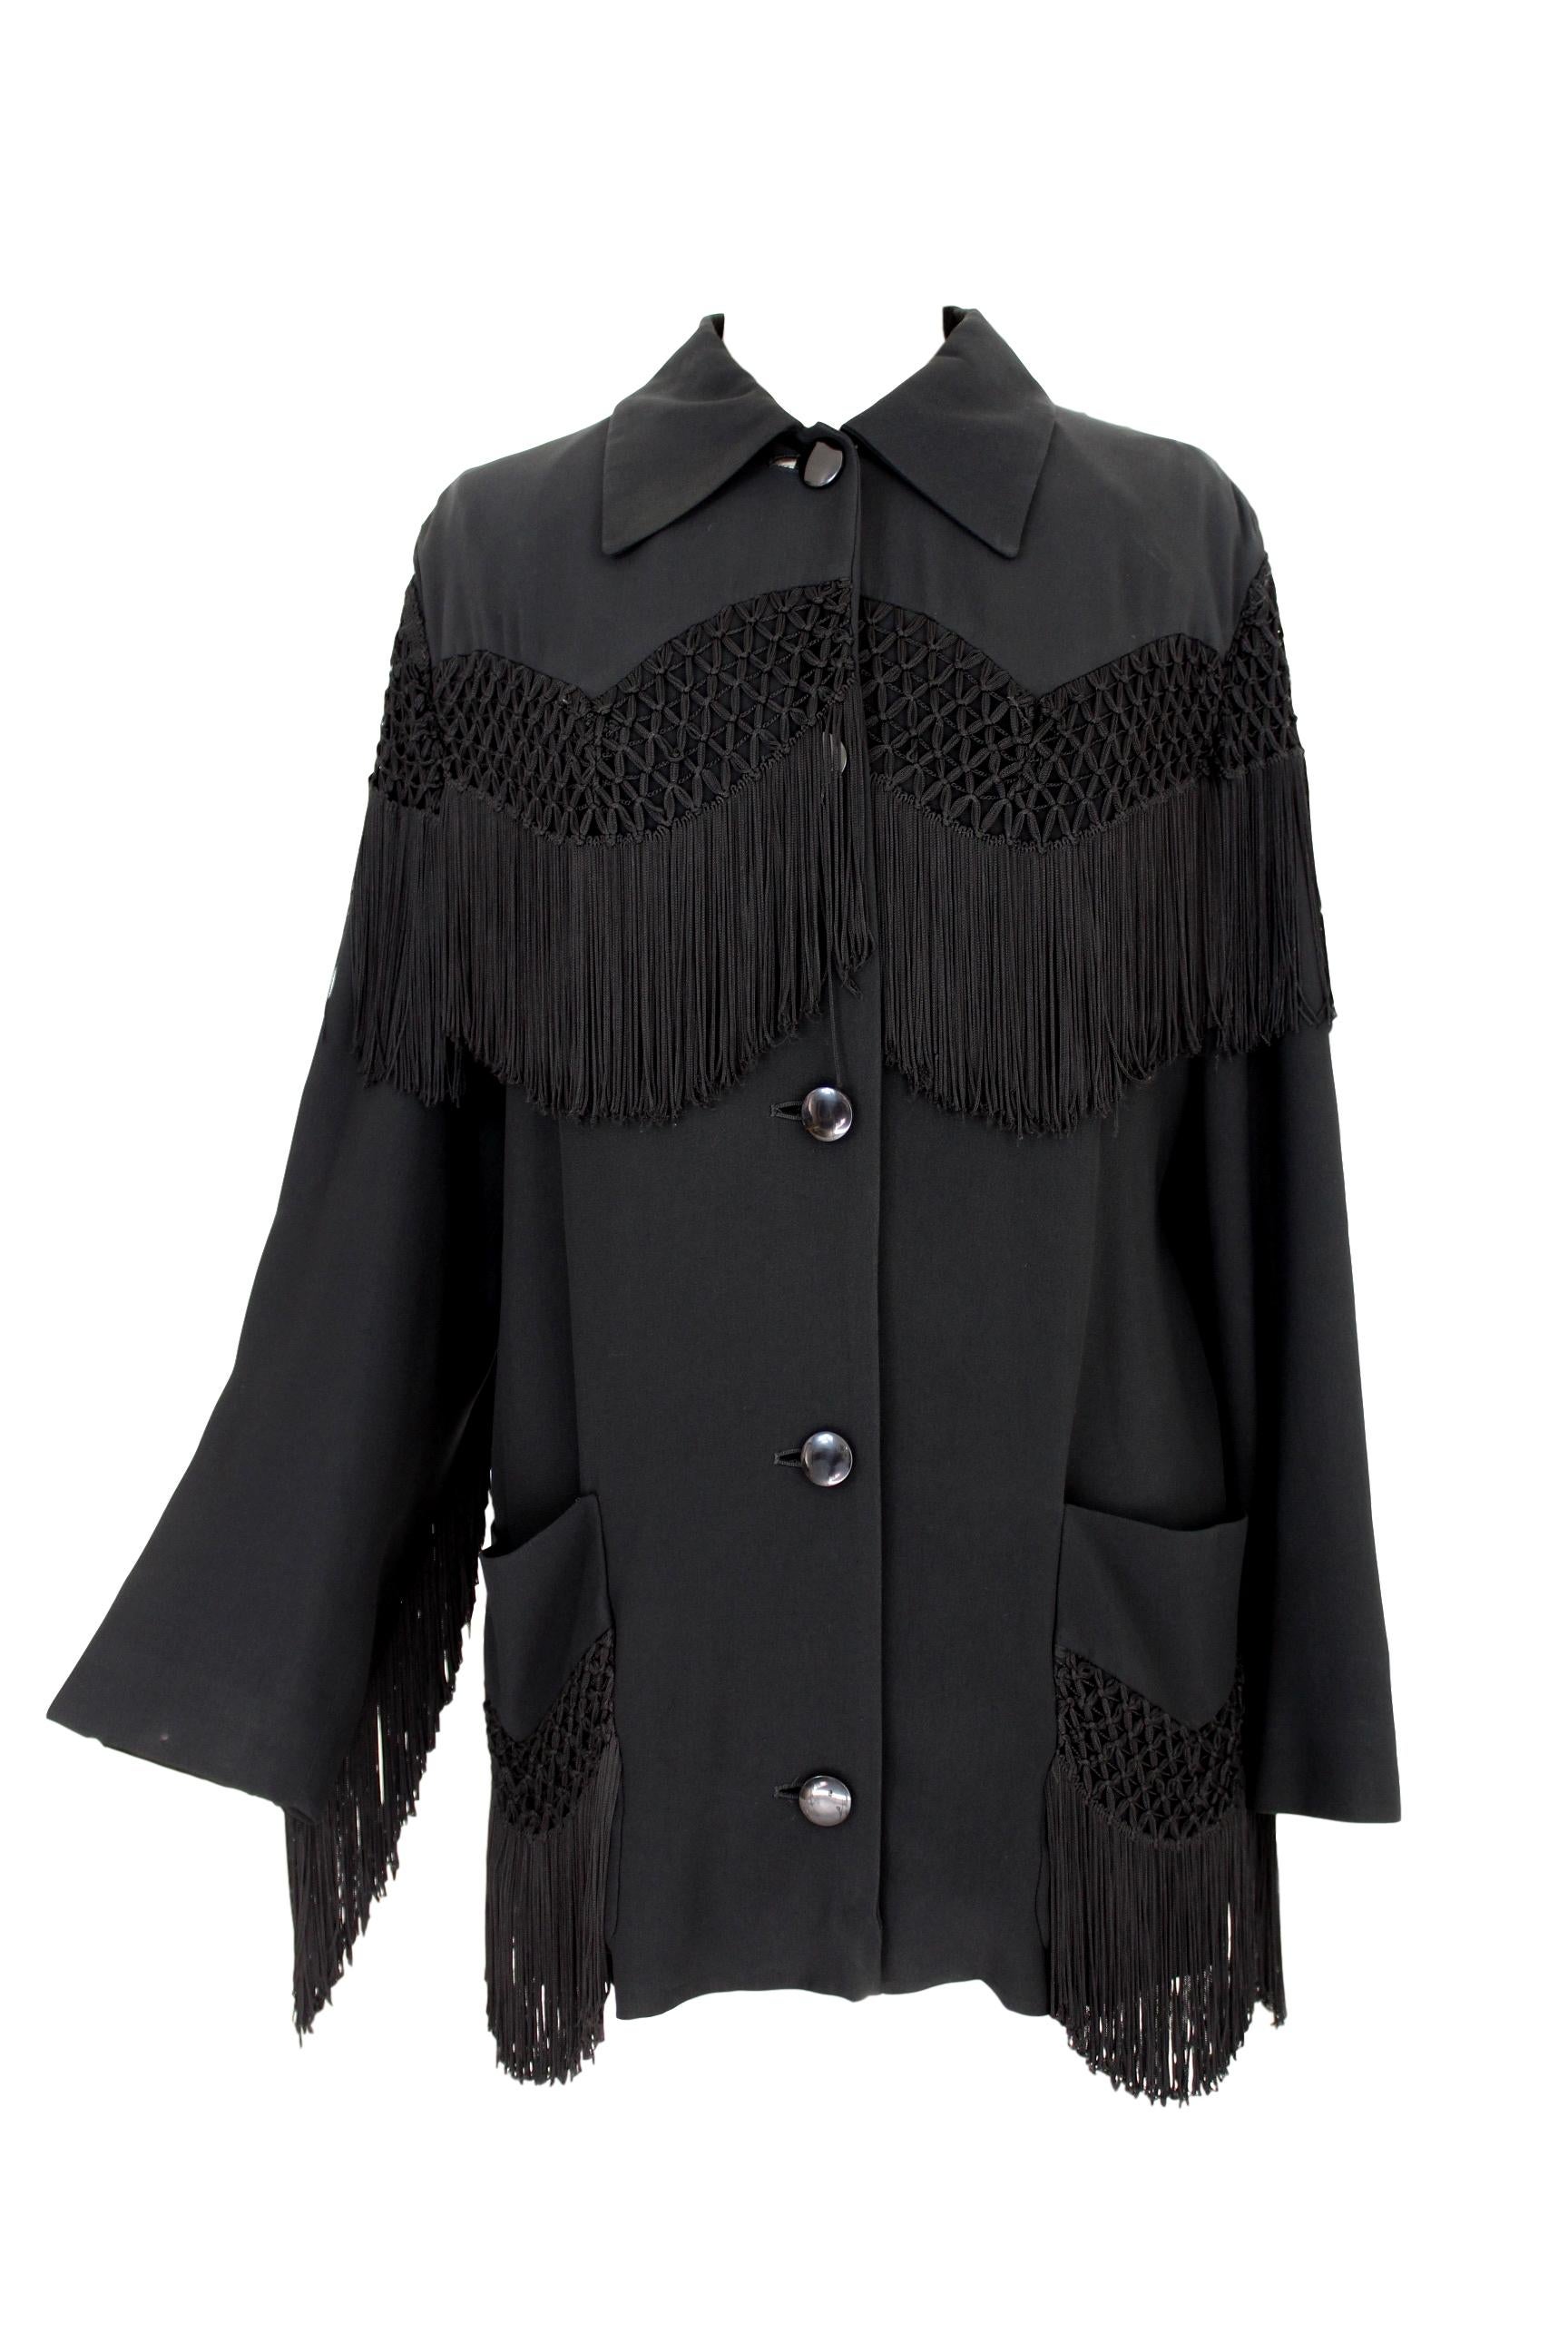 Moschino Couture vintage 80s women's jacket. Model western with long fringe, both on the length of the jacket and on the sleeves with embroidery on the chest. 55% acetate 45% rayon. Internally lined. Made in Italy. Excellent vintage